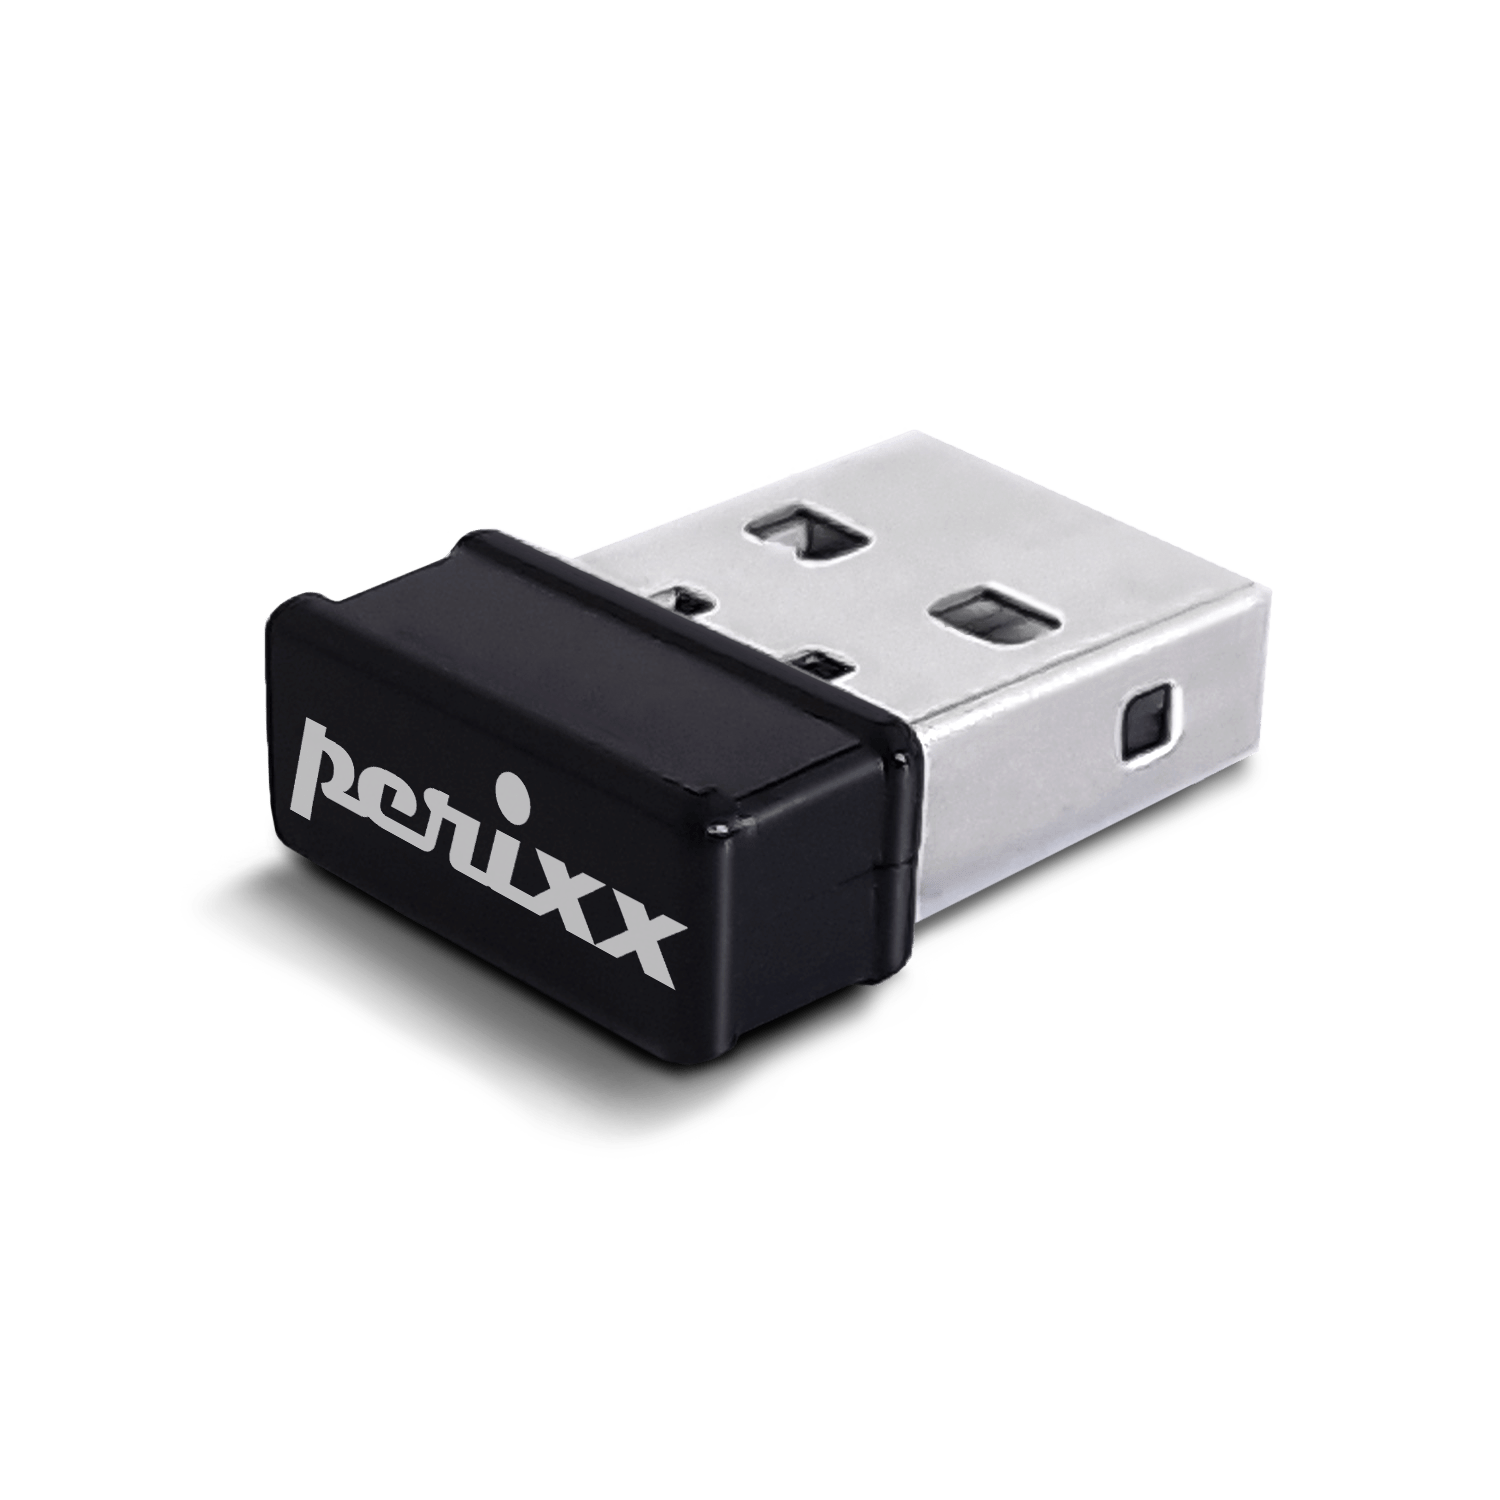 USB dongle receiver for PERIDUO-714 - Perixx Europe